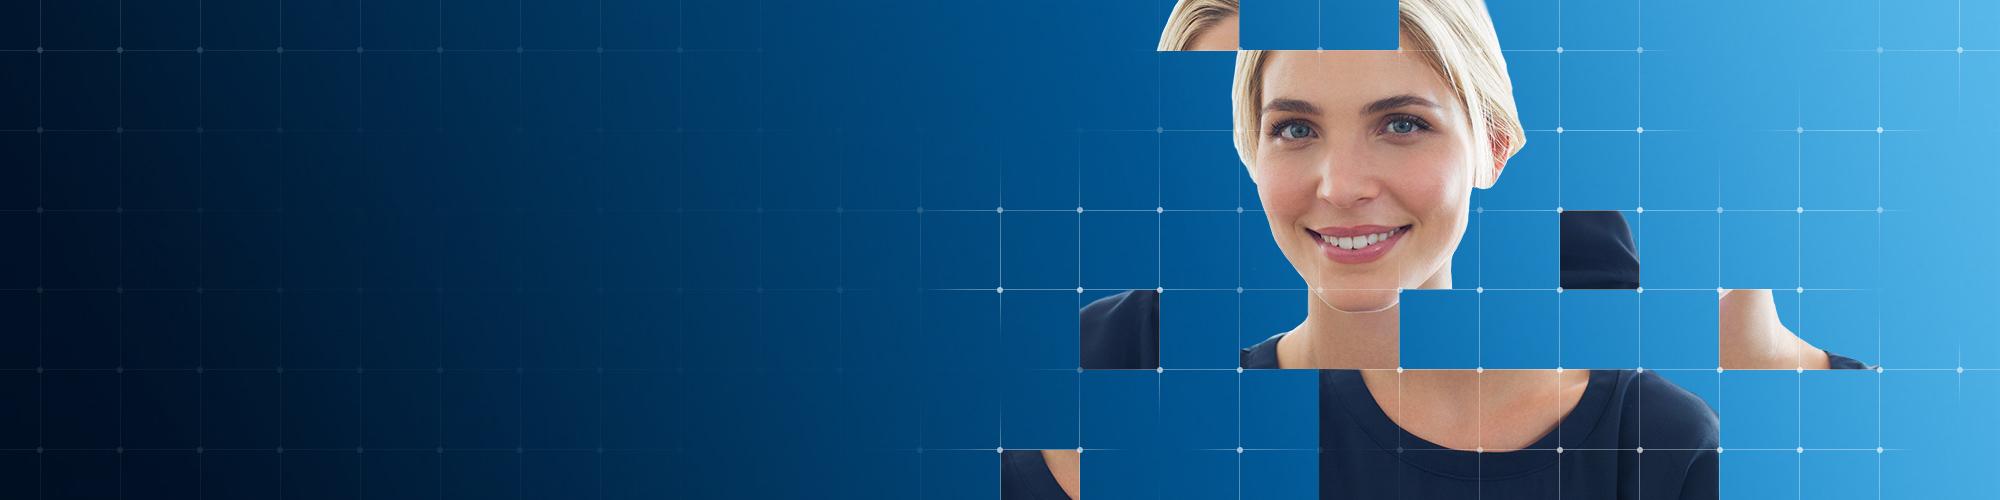 Young woman puzzle pieces/connected dots effect on blue background